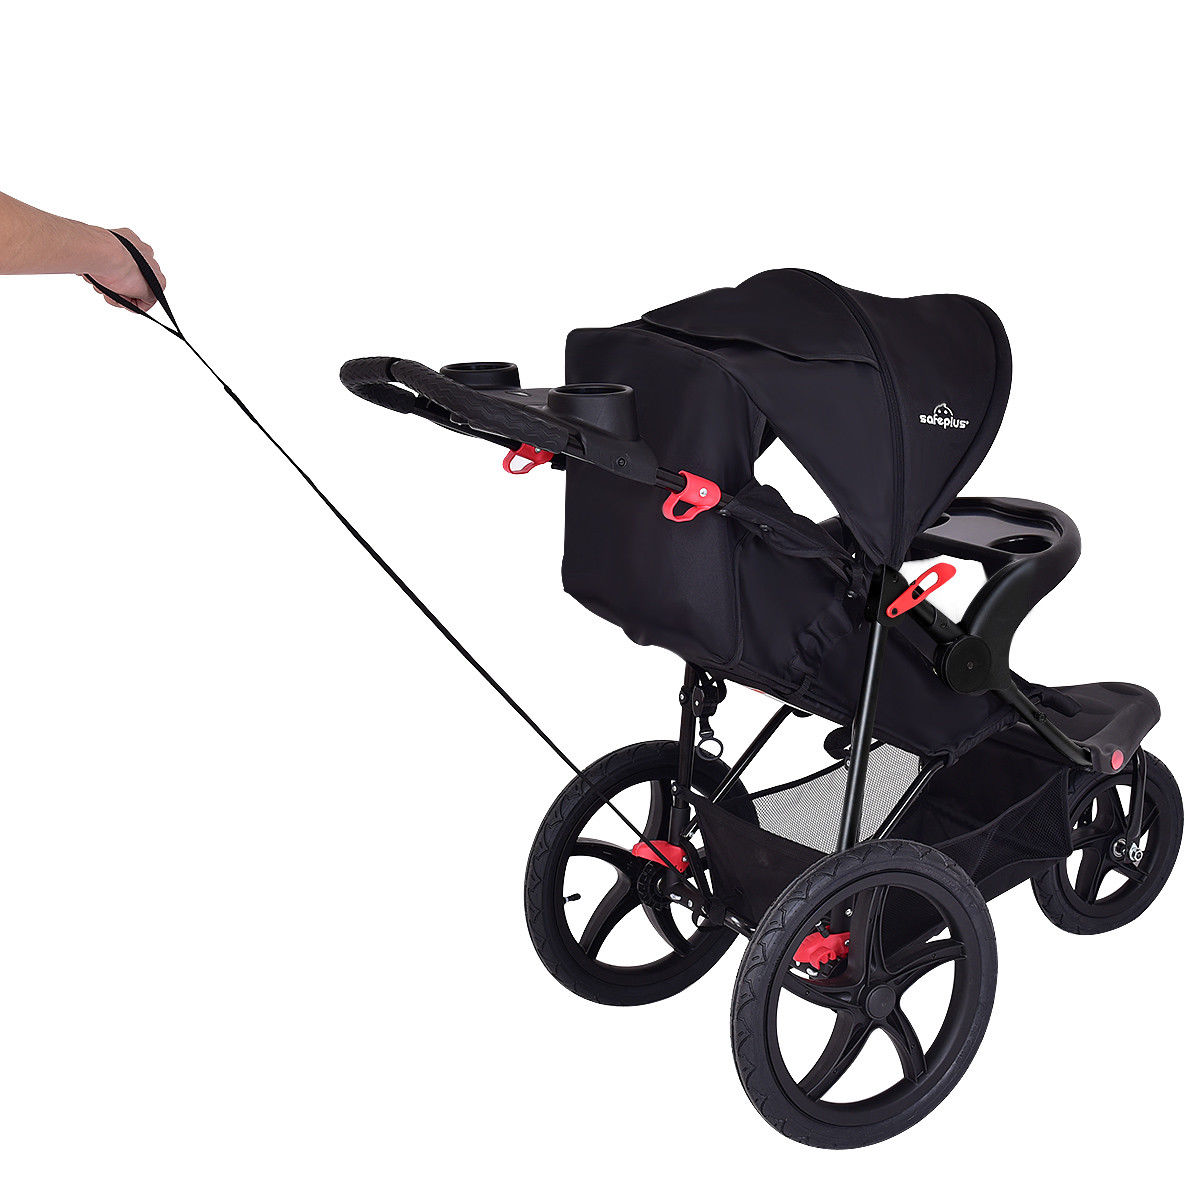 jj cole baby carrier